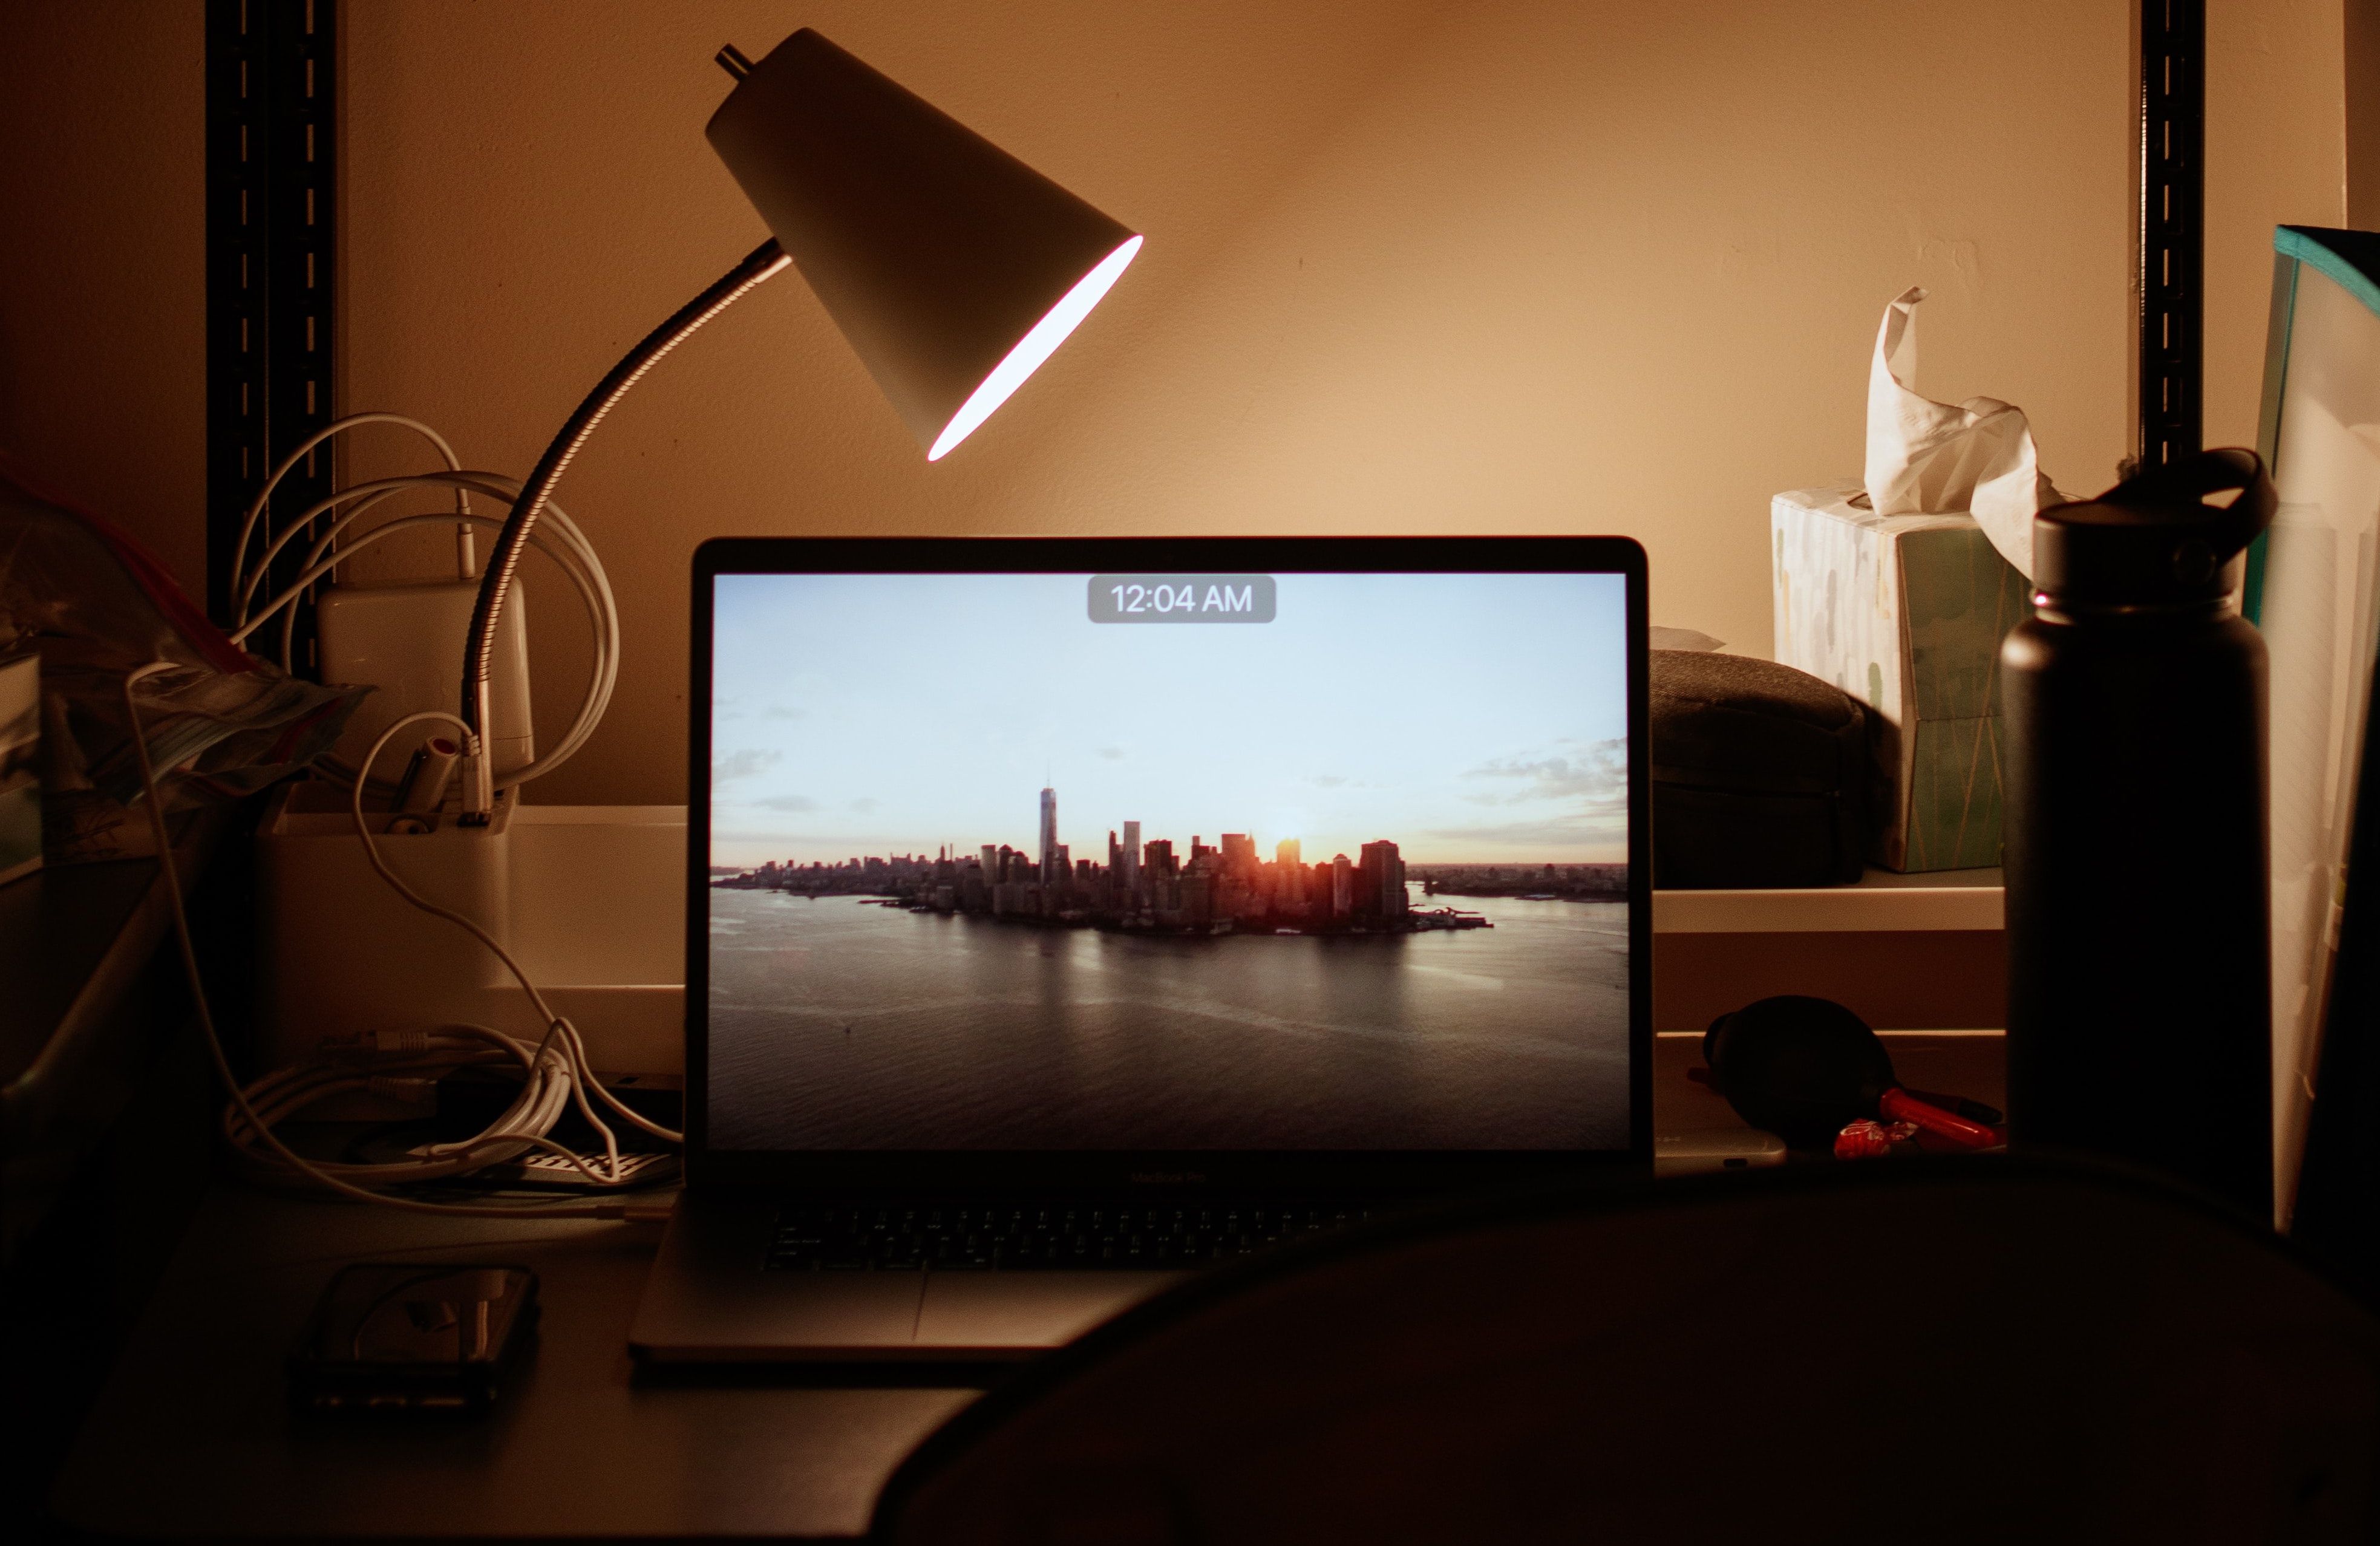 Are Desk Lamps Good or Bad for your Eyes?